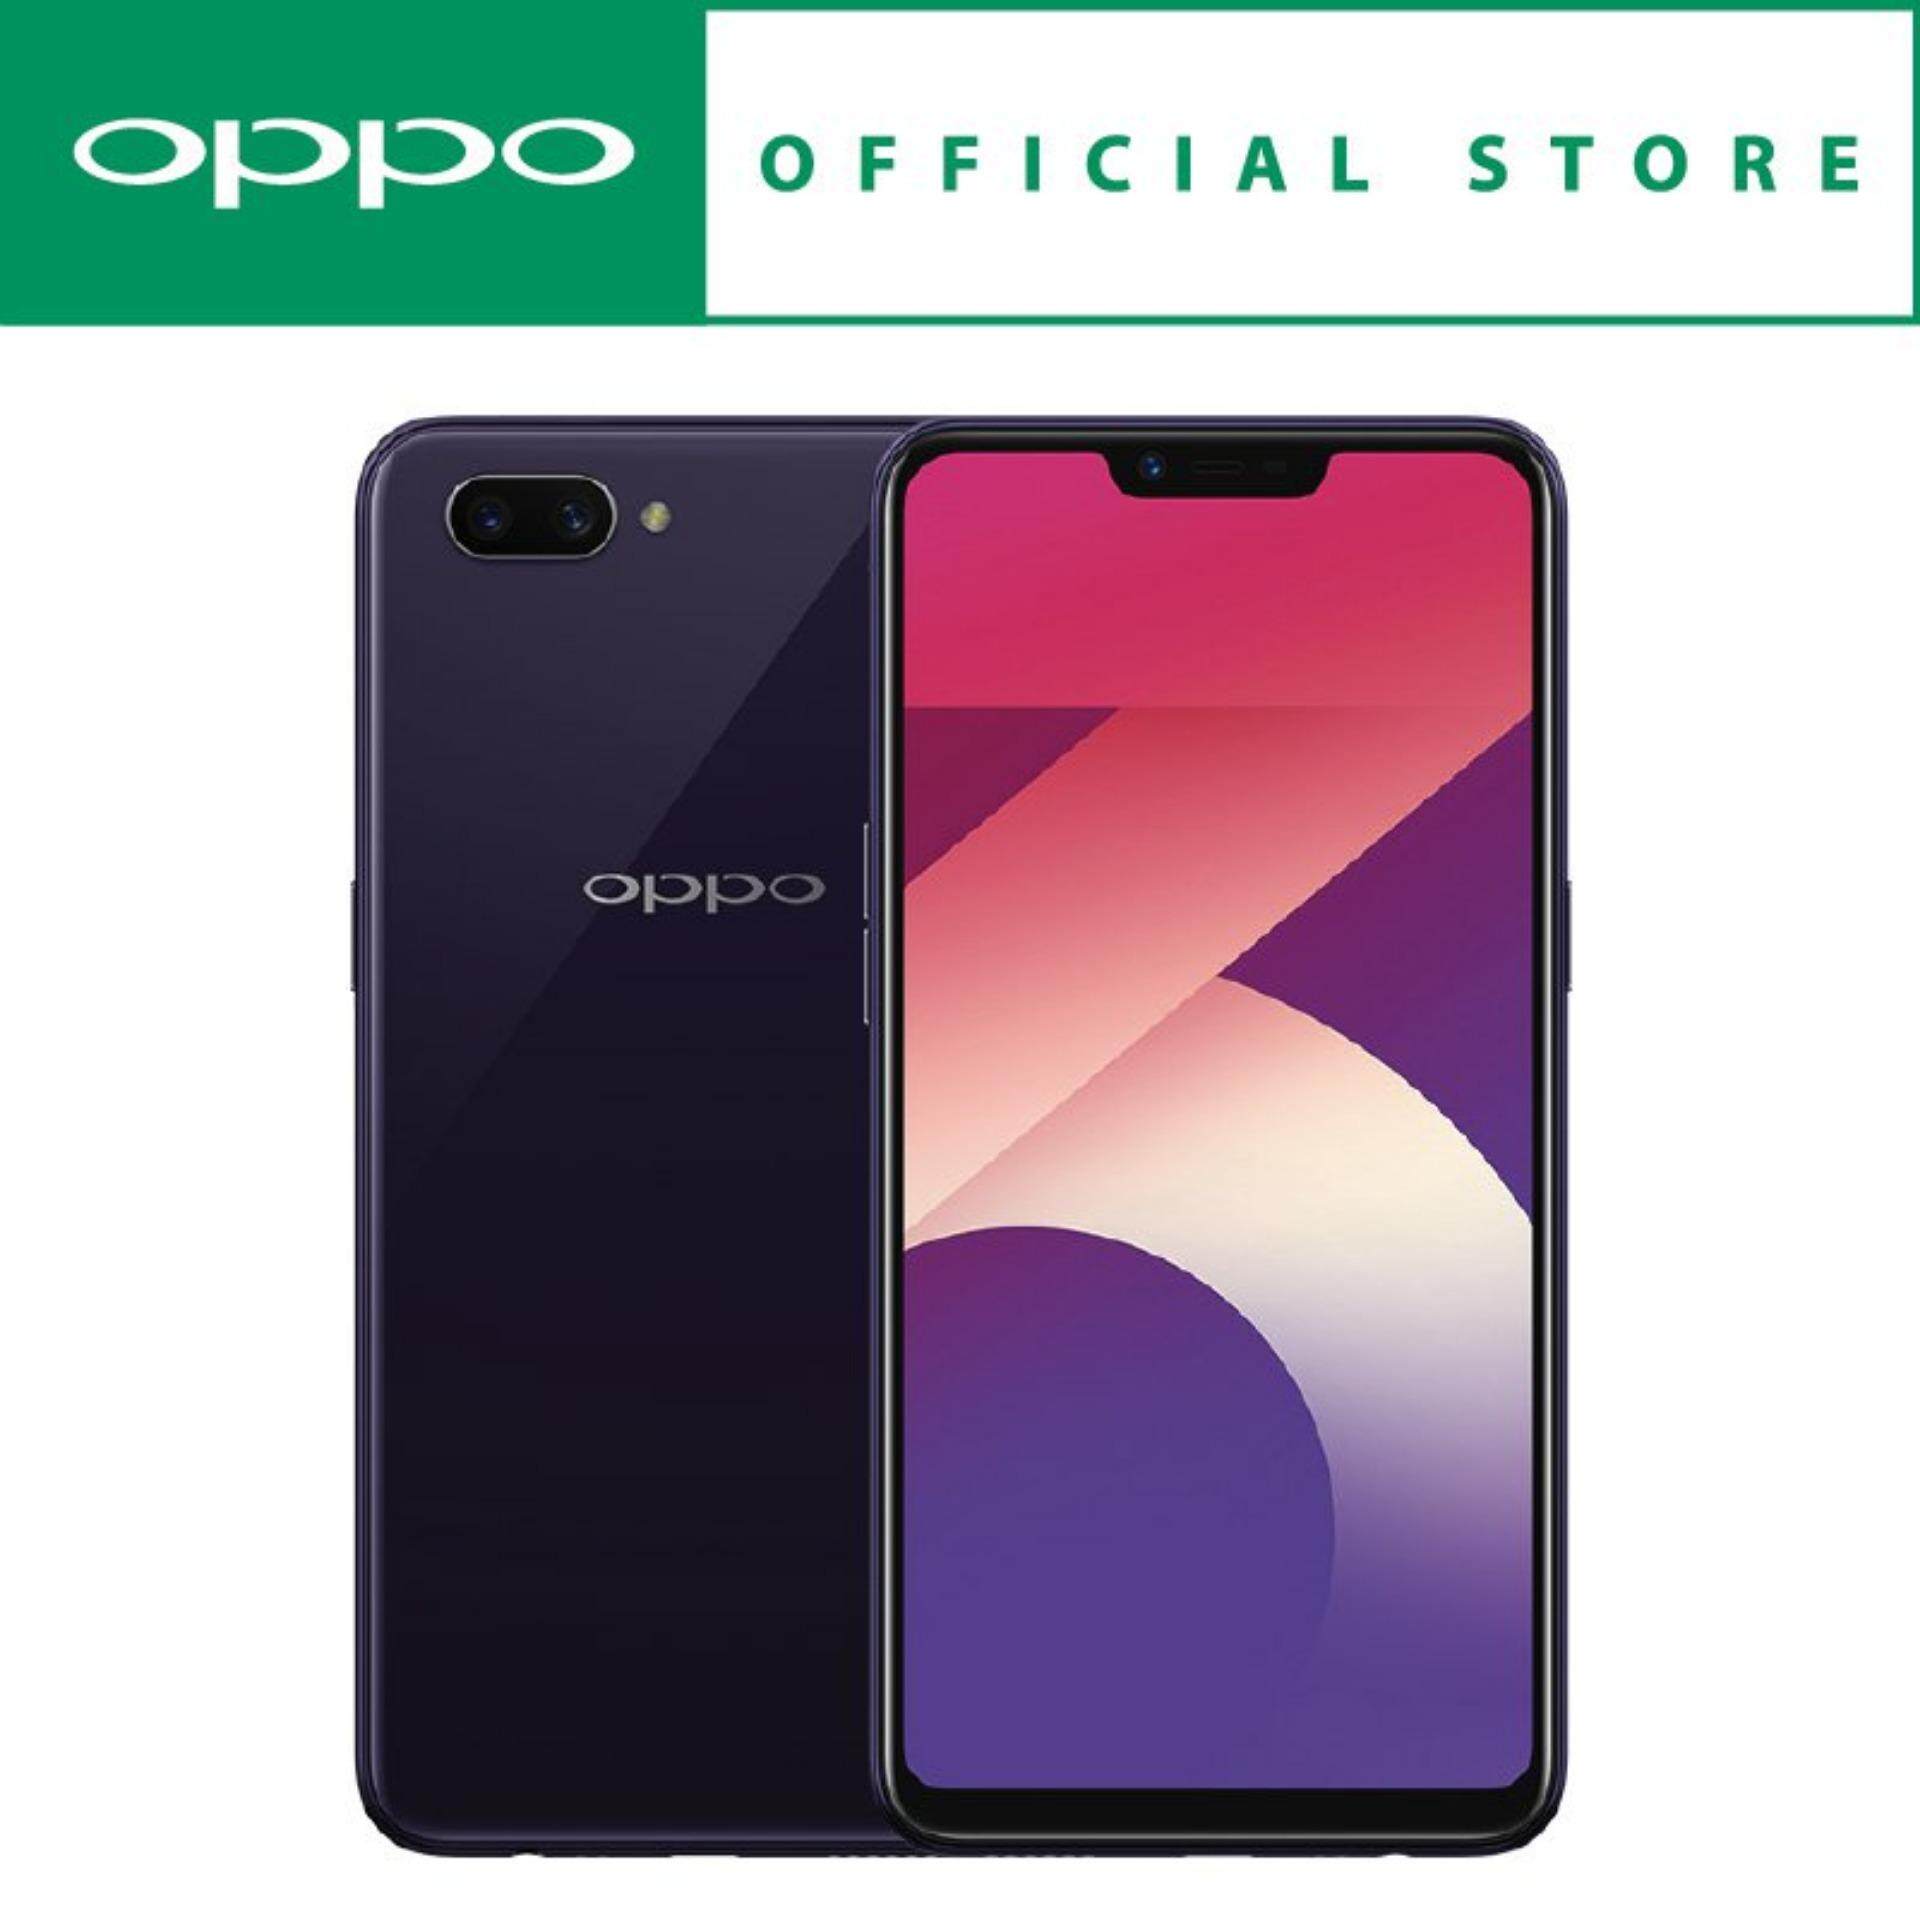 Oppo a58 обзор. Oppo a3s. Смартфон Oppo a3s Red. Oppo a5 2018. Oppo a5/a3s.